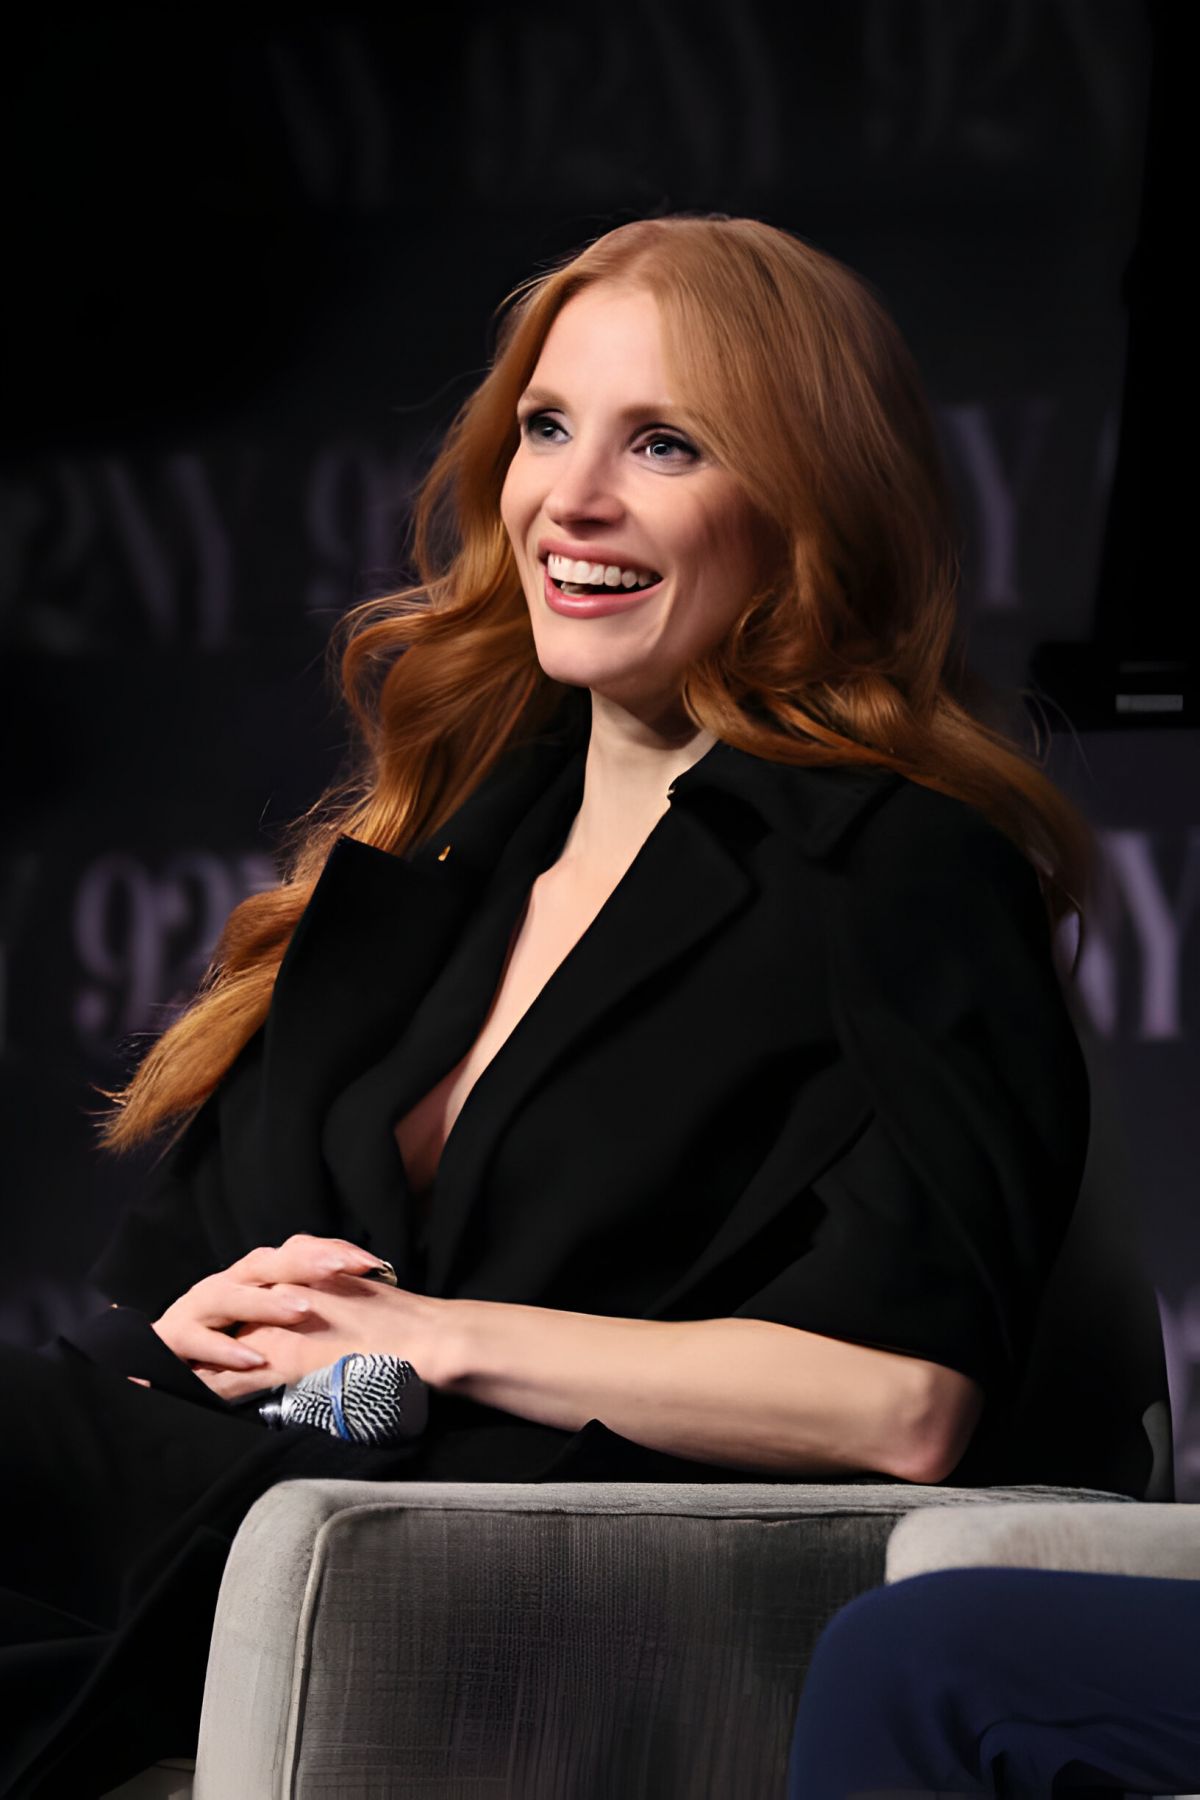 Jessica Chastain in black outfit at 92NY Memory Talk in New York 1